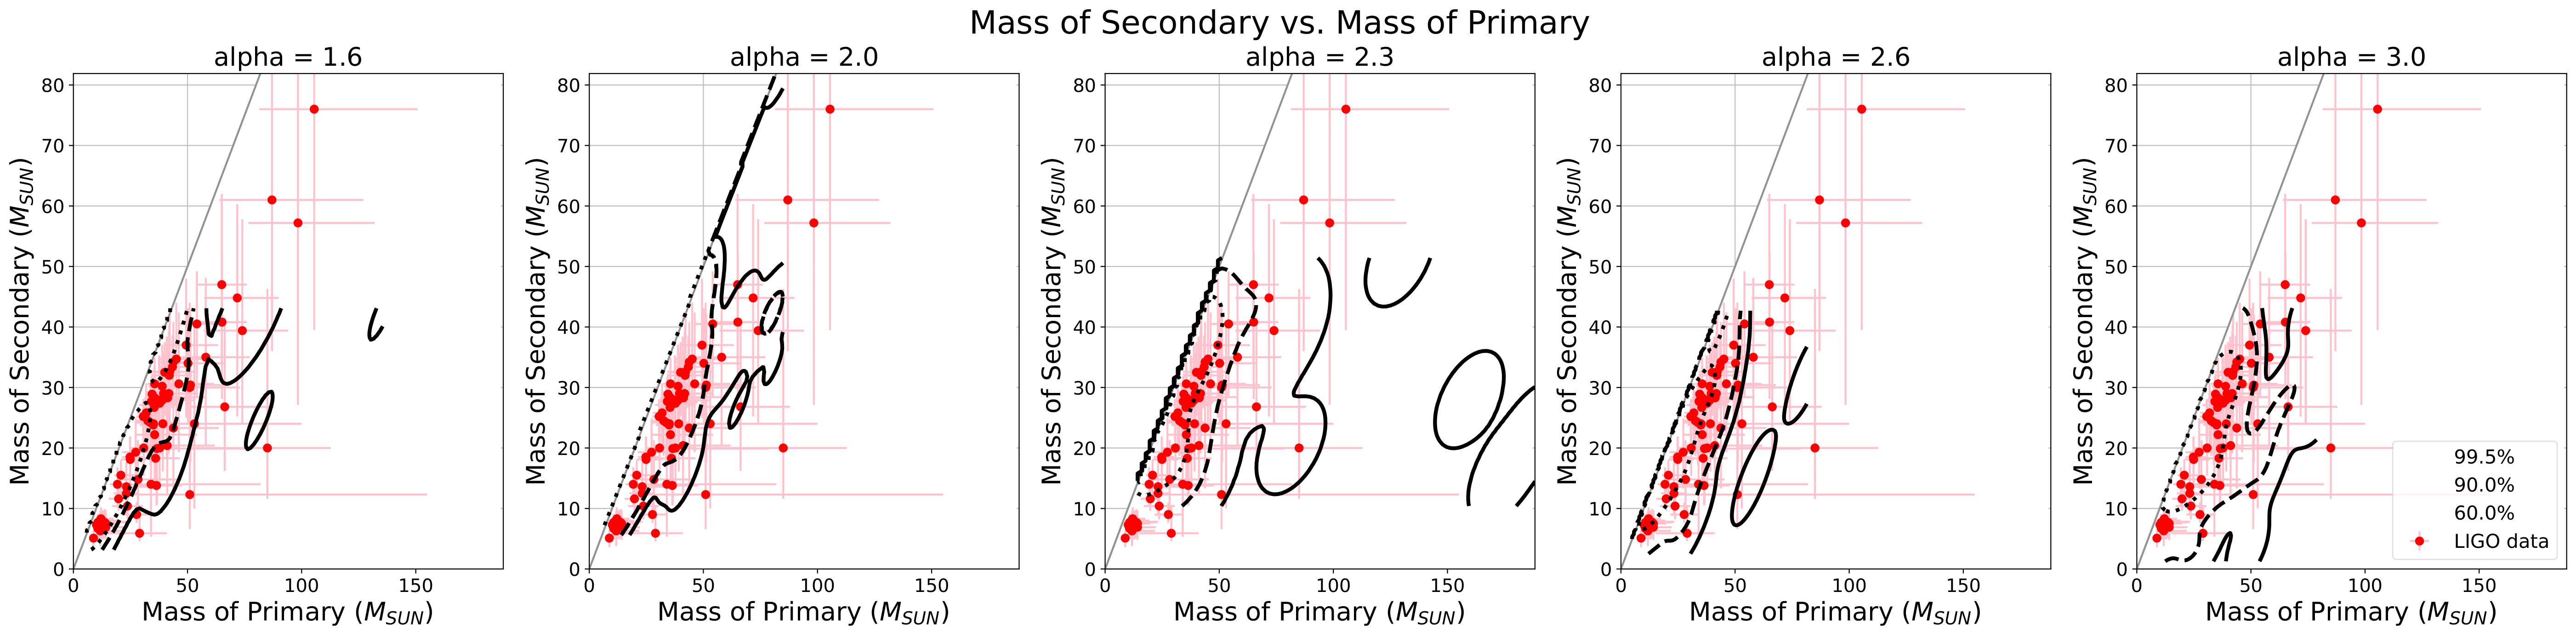 Plot of primary mass vs secondary mass for each of the five values of alpha-3